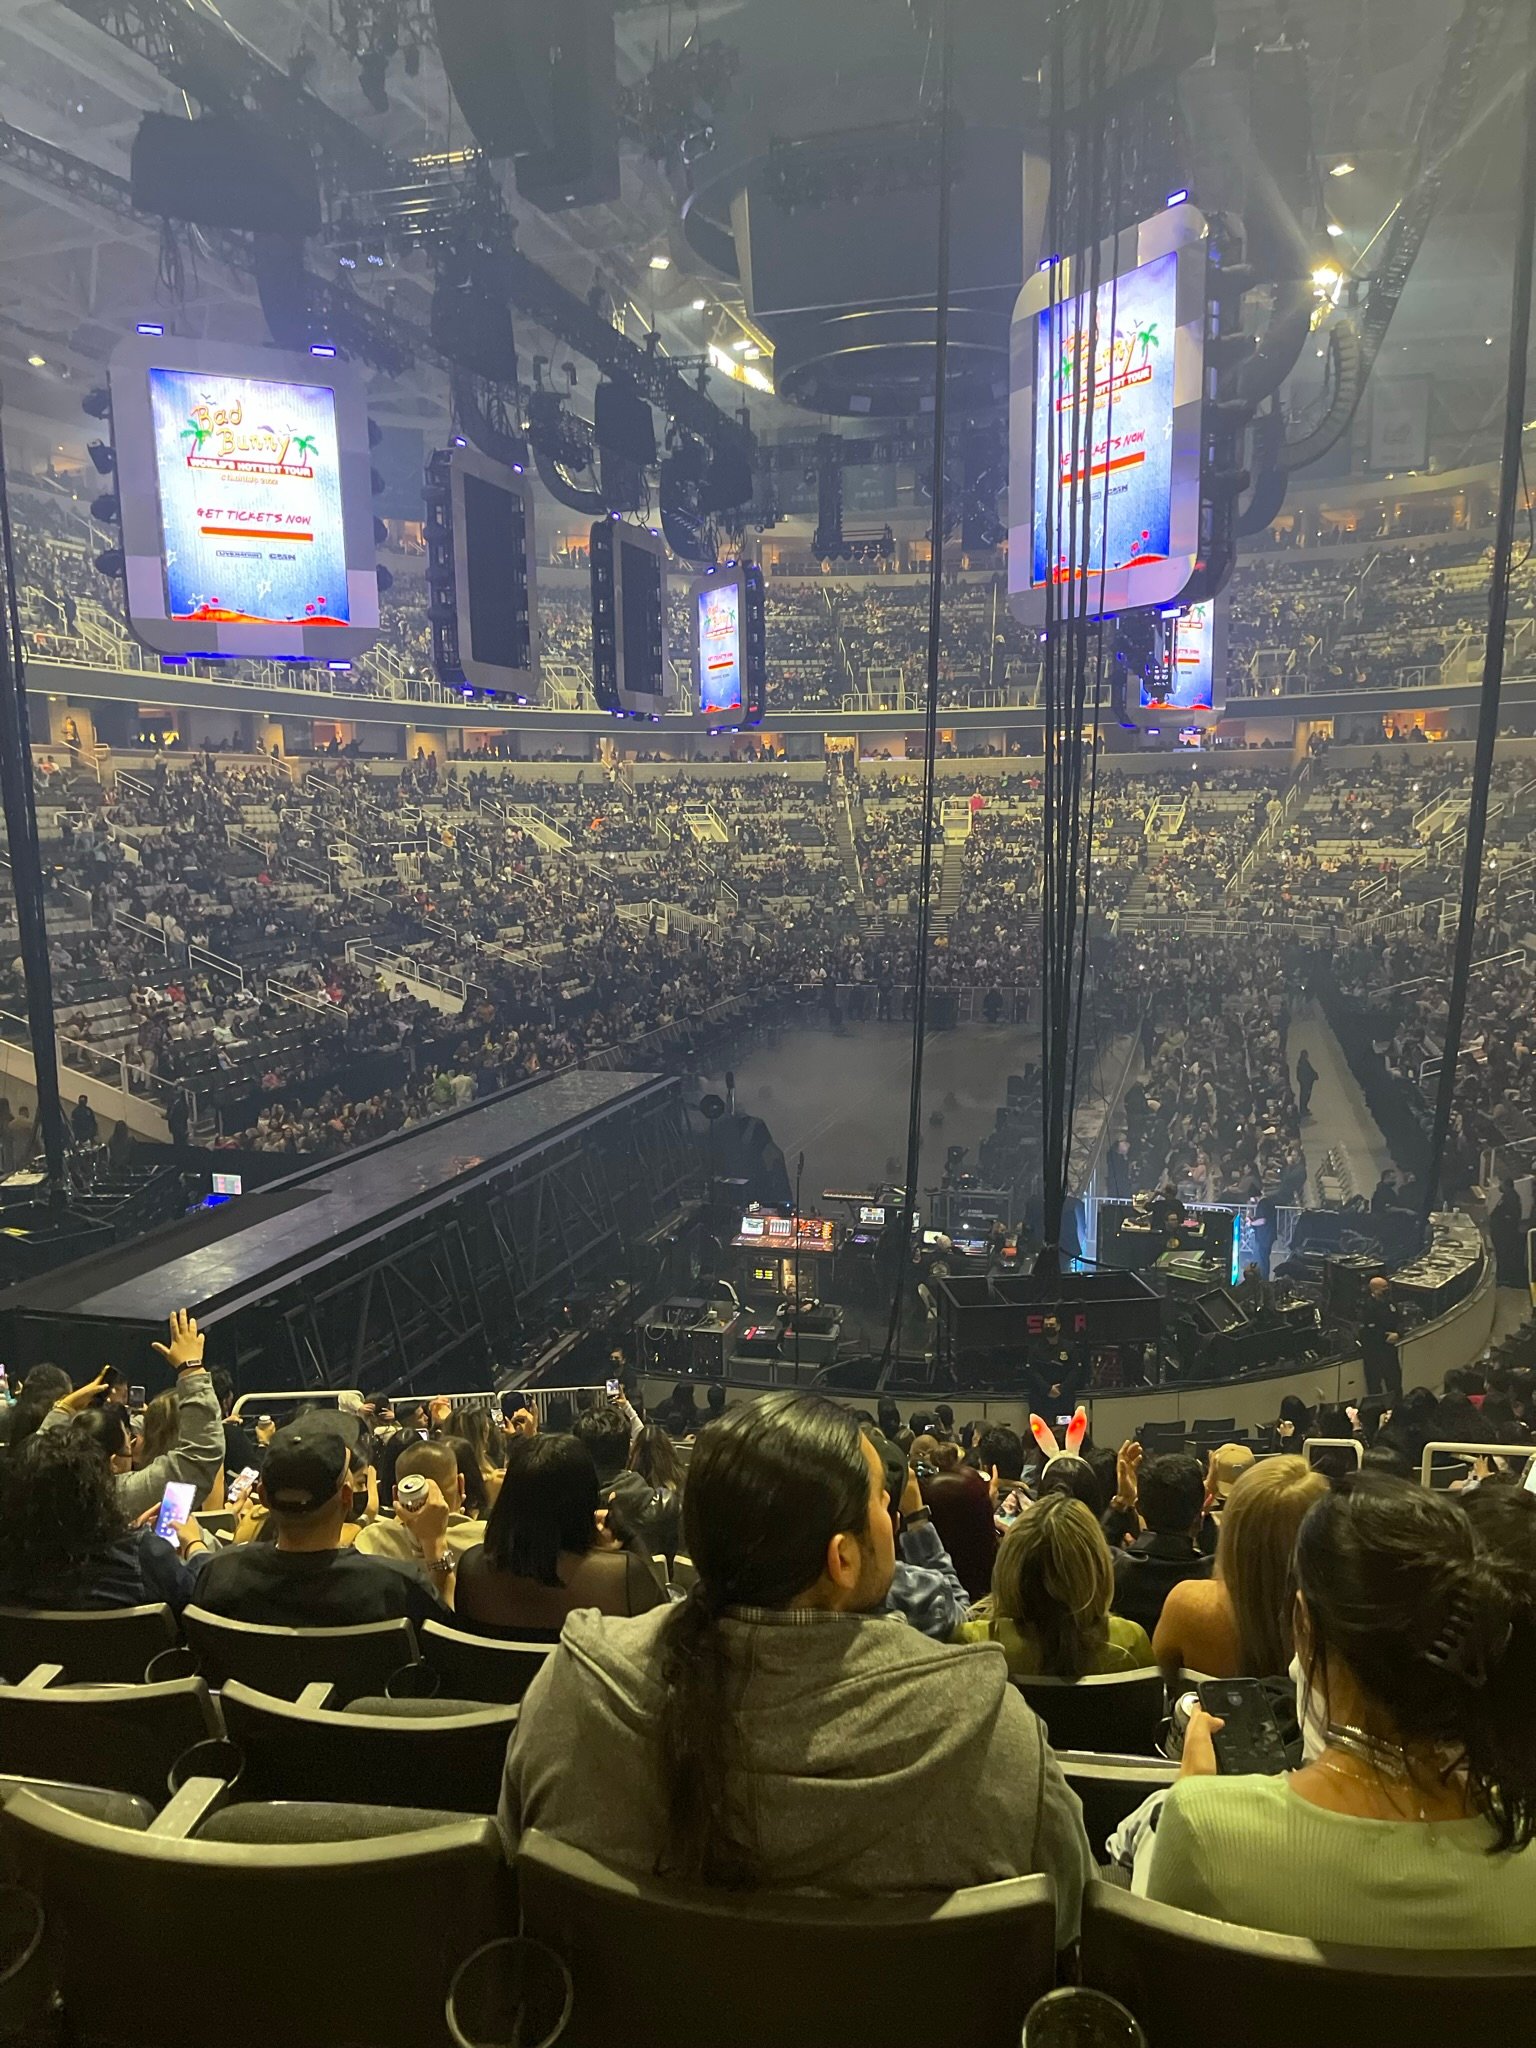 section 121, row 20 seat view  for concert - sap center